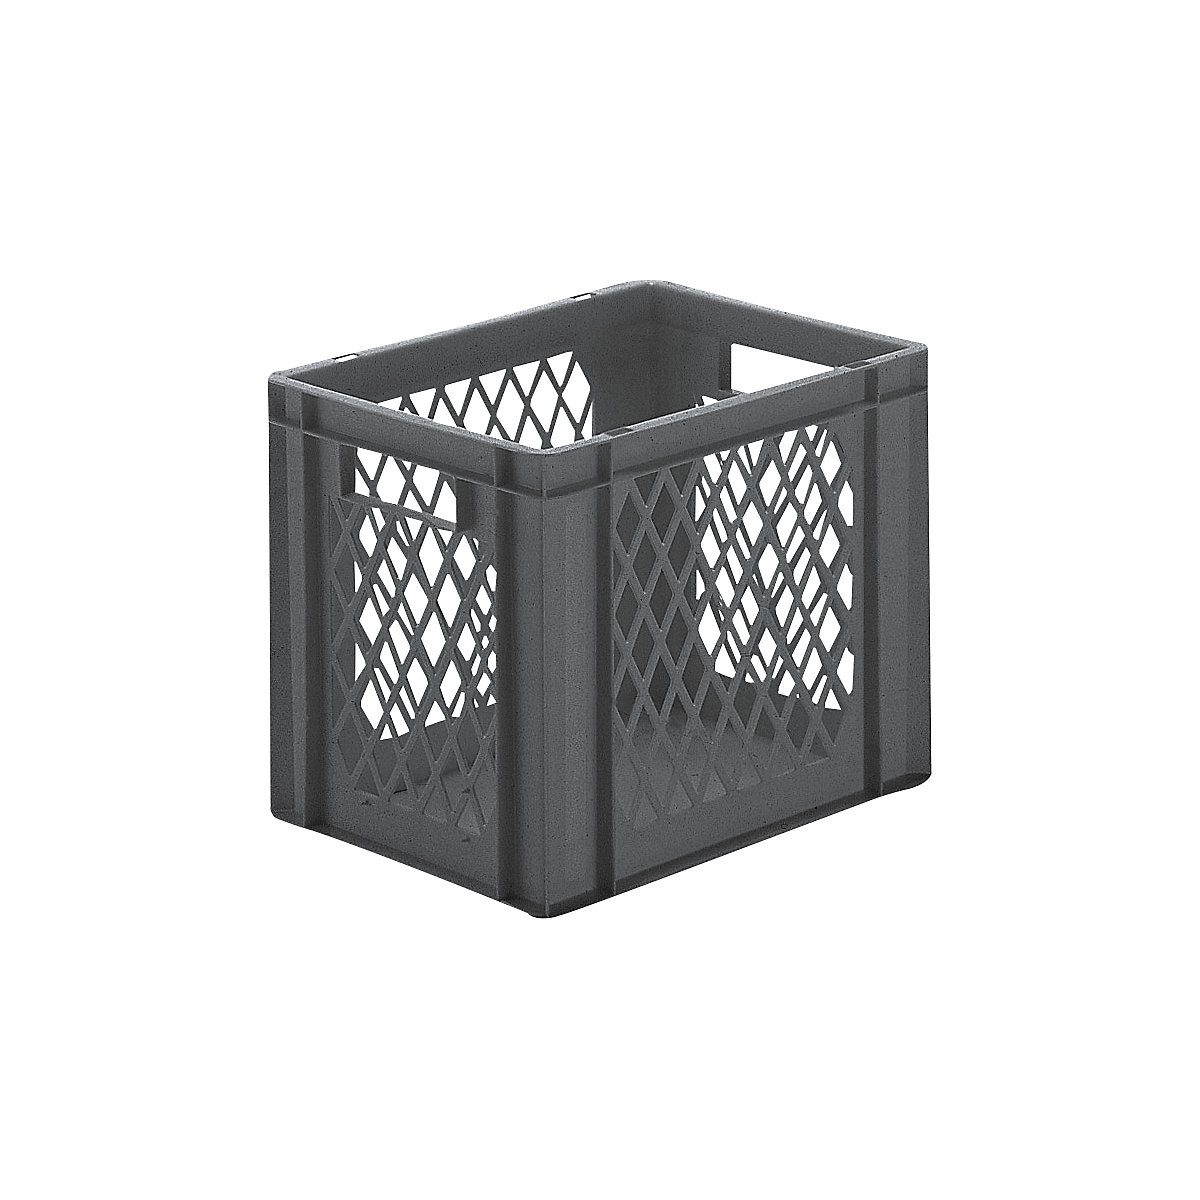 Euro stacking container, perforated walls, closed base, LxWxH 400 x 300 x 320 mm, grey, pack of 5-6